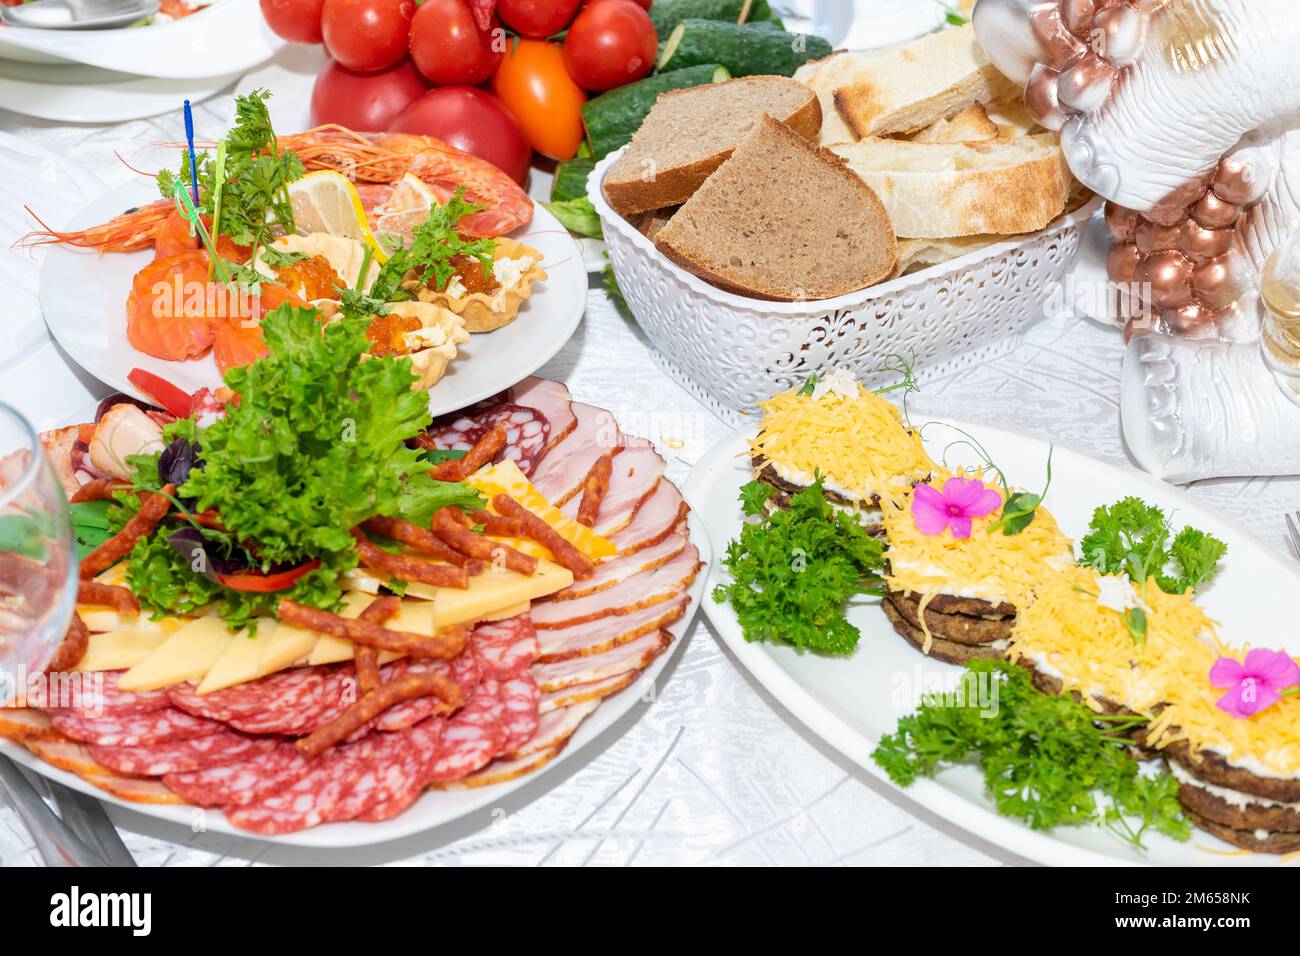 Delicious cold snacks are ready to eat. A variety of cold snacks on the festive table. Cut meat and seafood on the festive table. Stock Photo